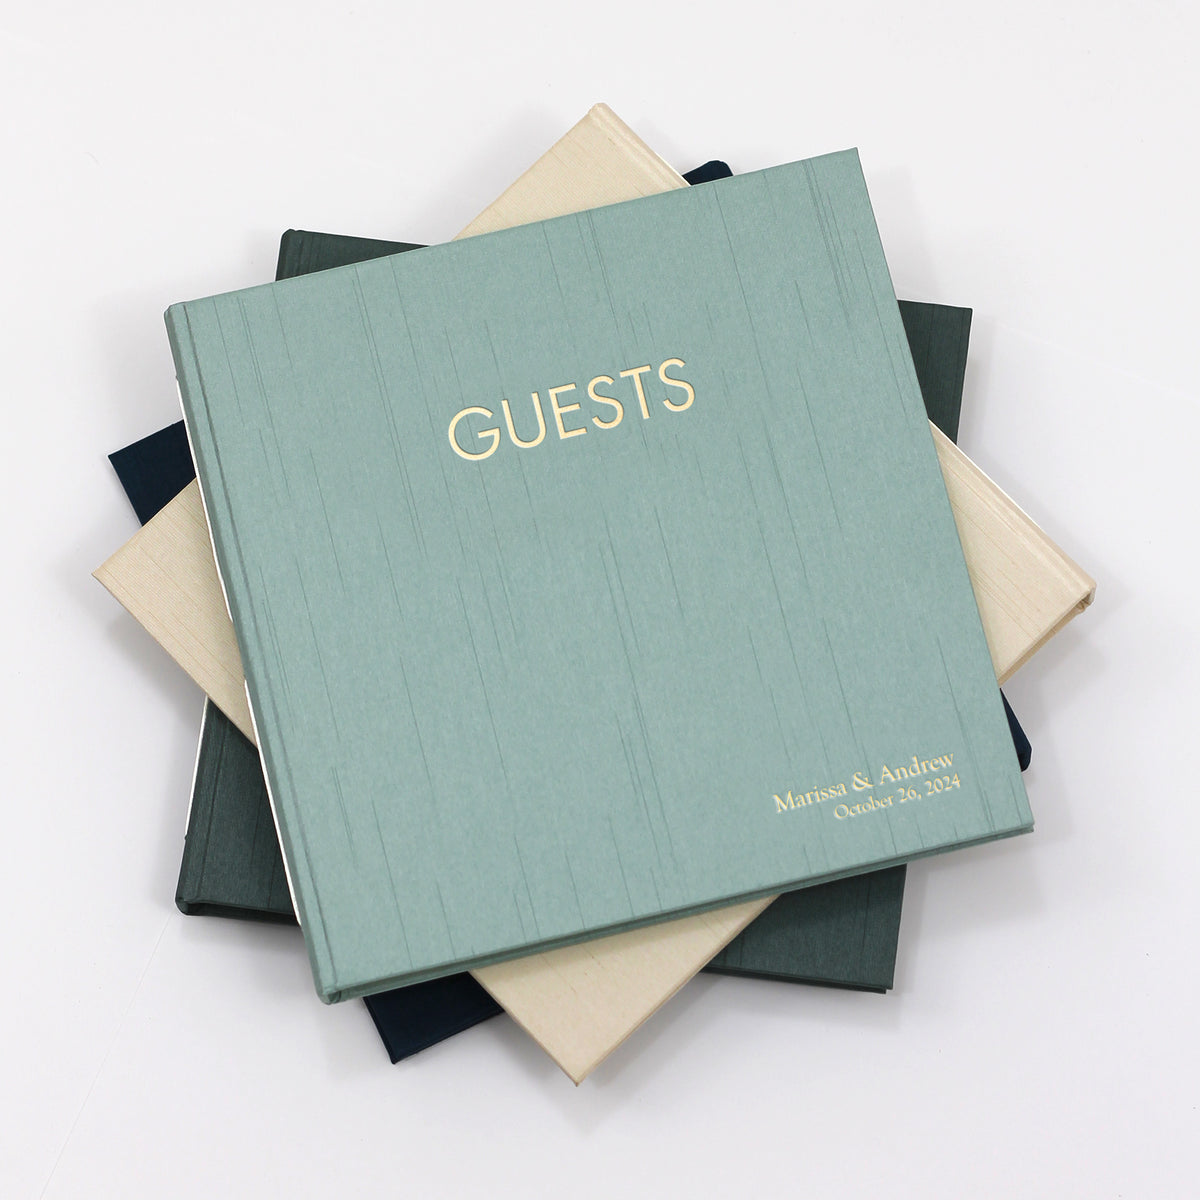 Event Guestbook Embossed with “Guests” | Cover: Amethyst Silk | Available Personalized